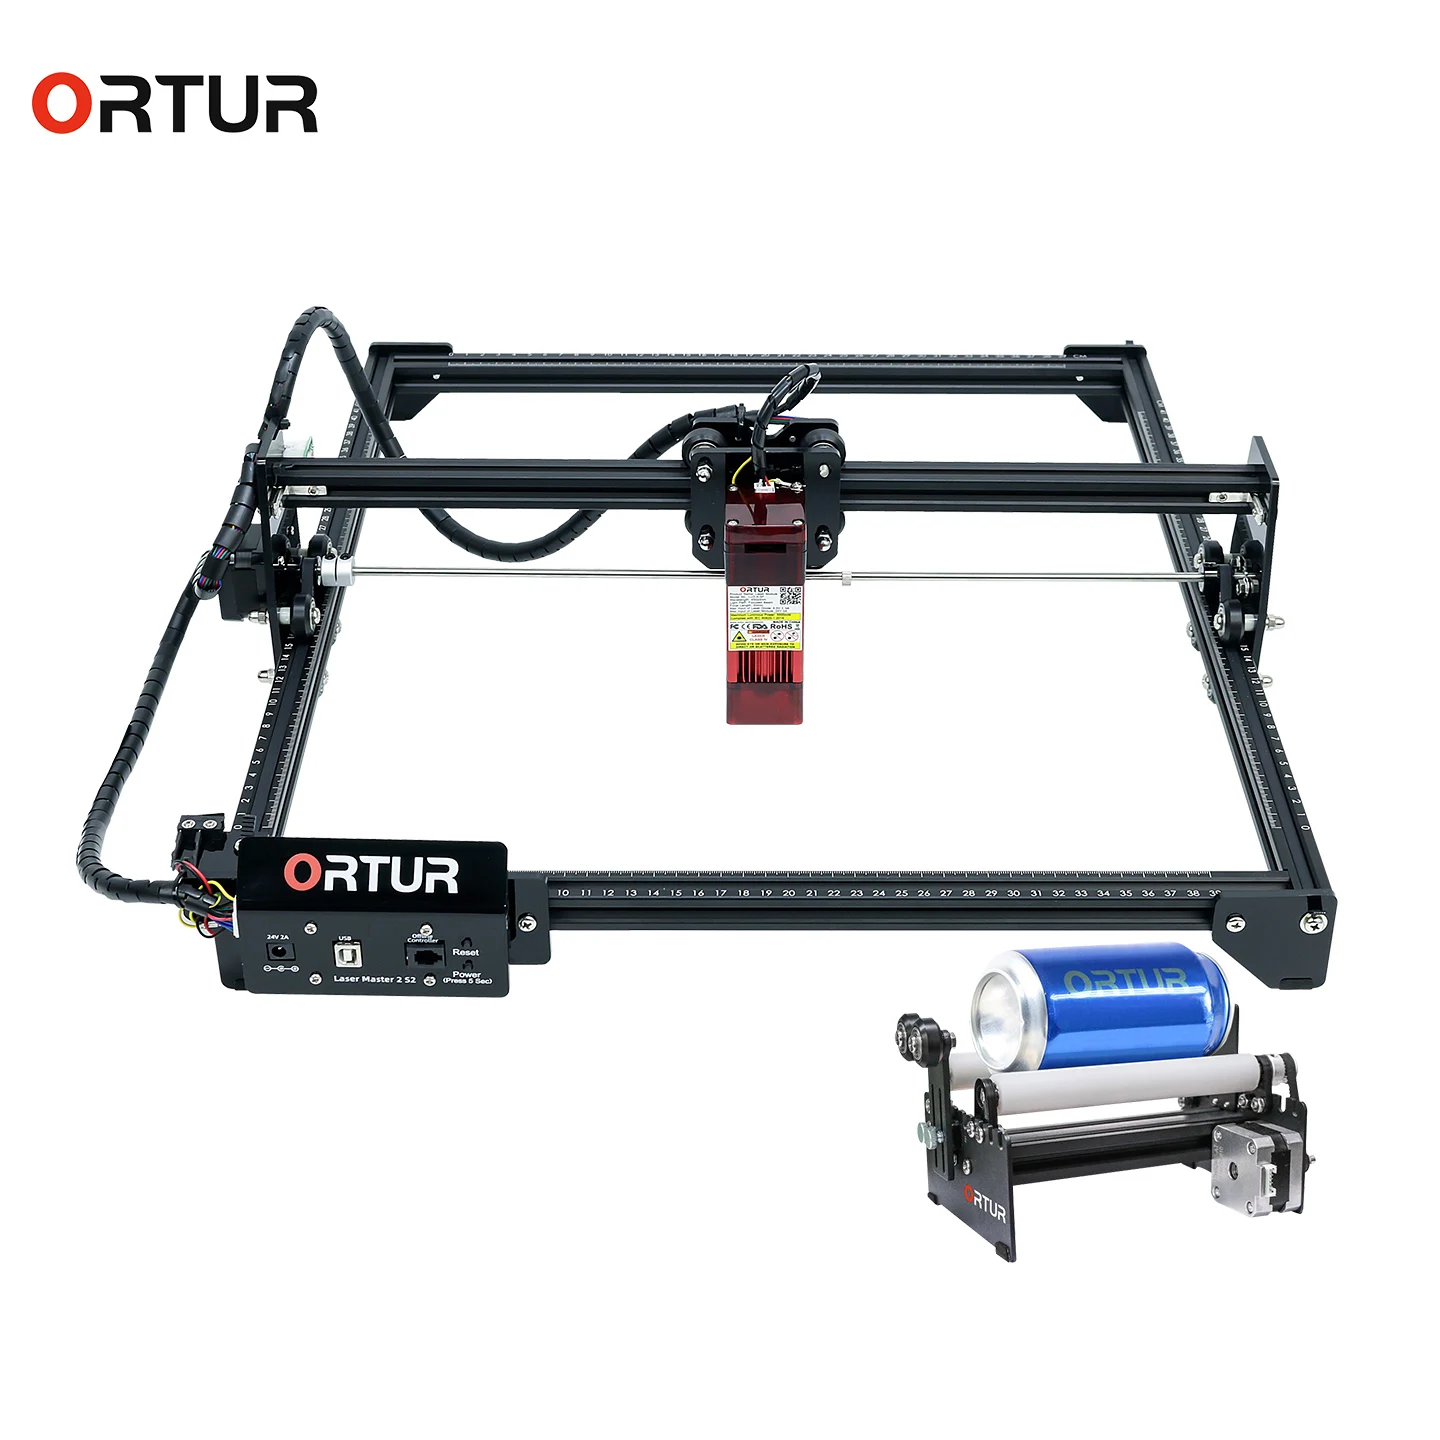 Upgraded Ortur-YRR Automatic Rotary Roller 2.0 with Ortur Laser Master 2 PRO S2 Available Adjustable Size for Engrave Cylinder enlarge